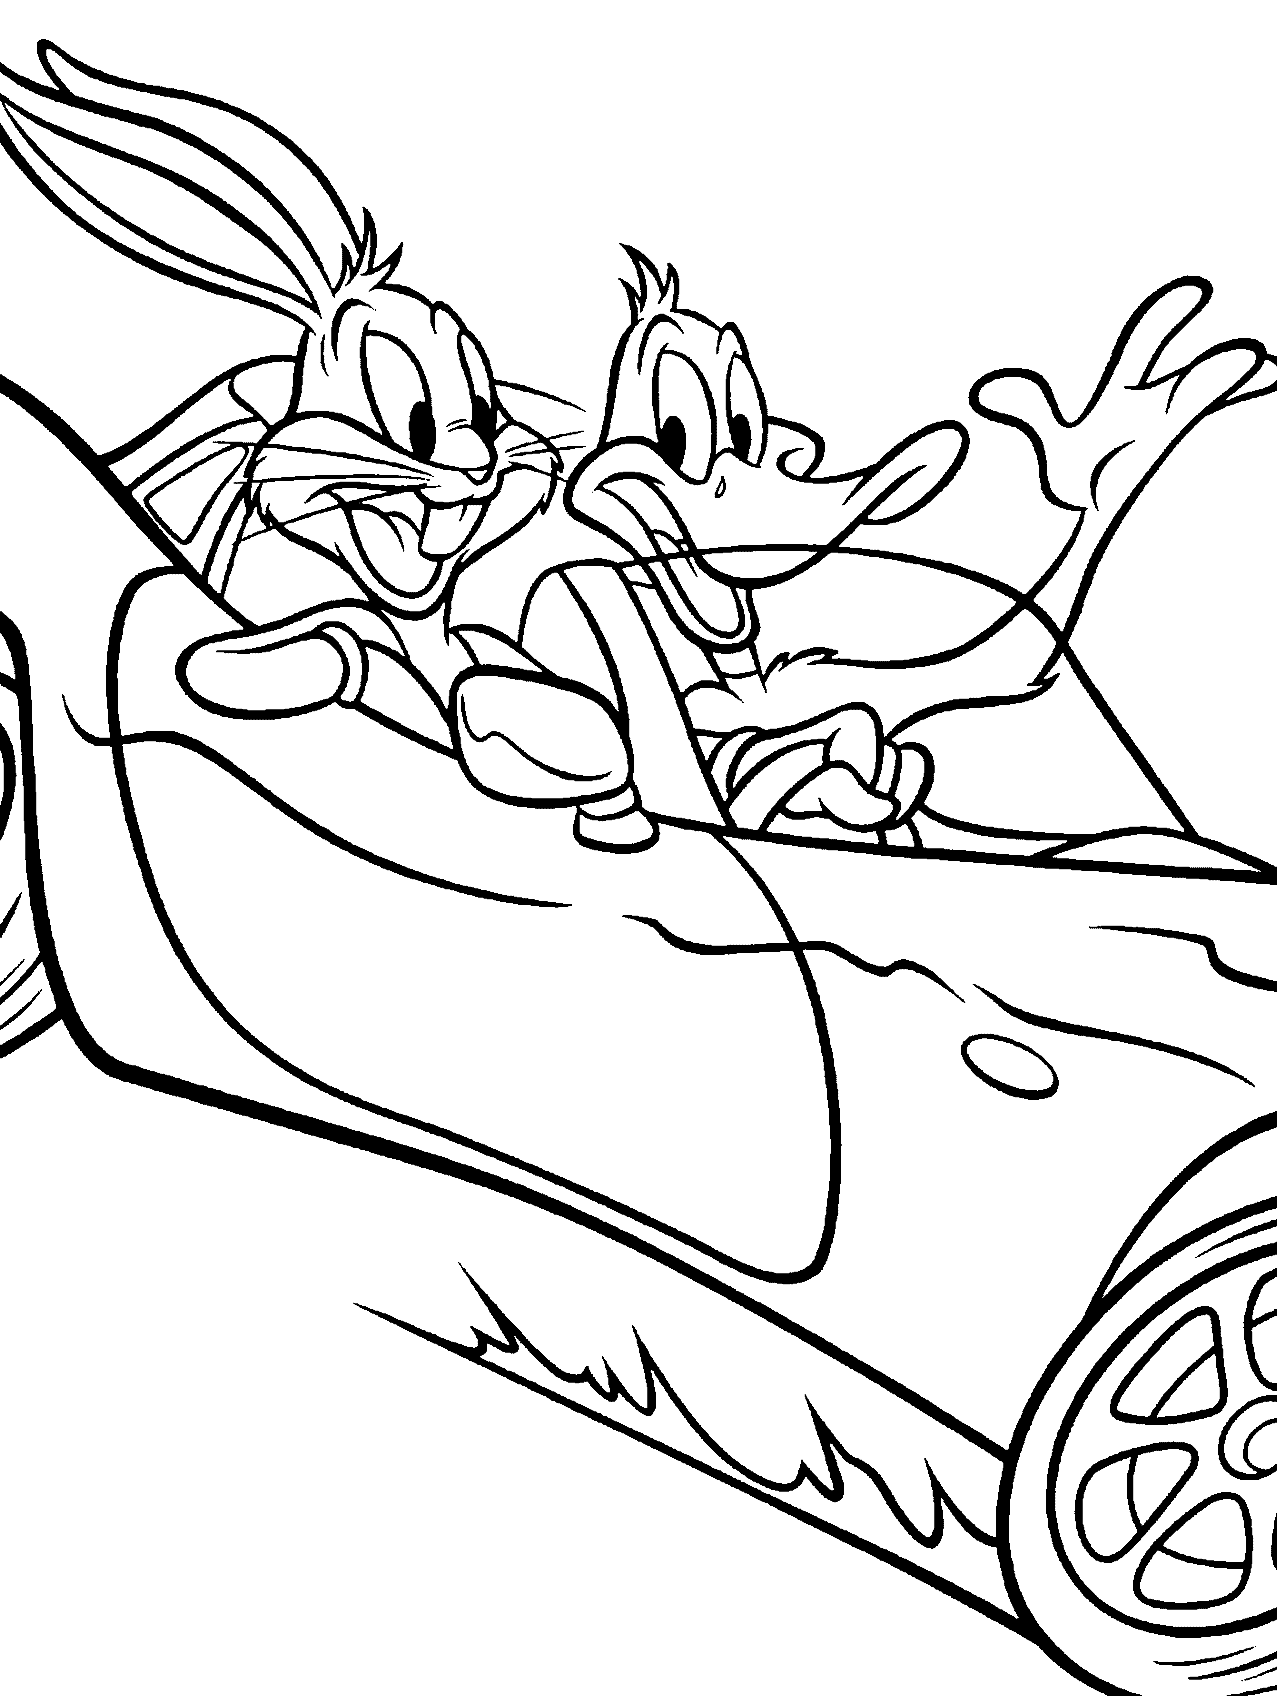 Daffy Duck And Bugs Bunny Coloring Pages